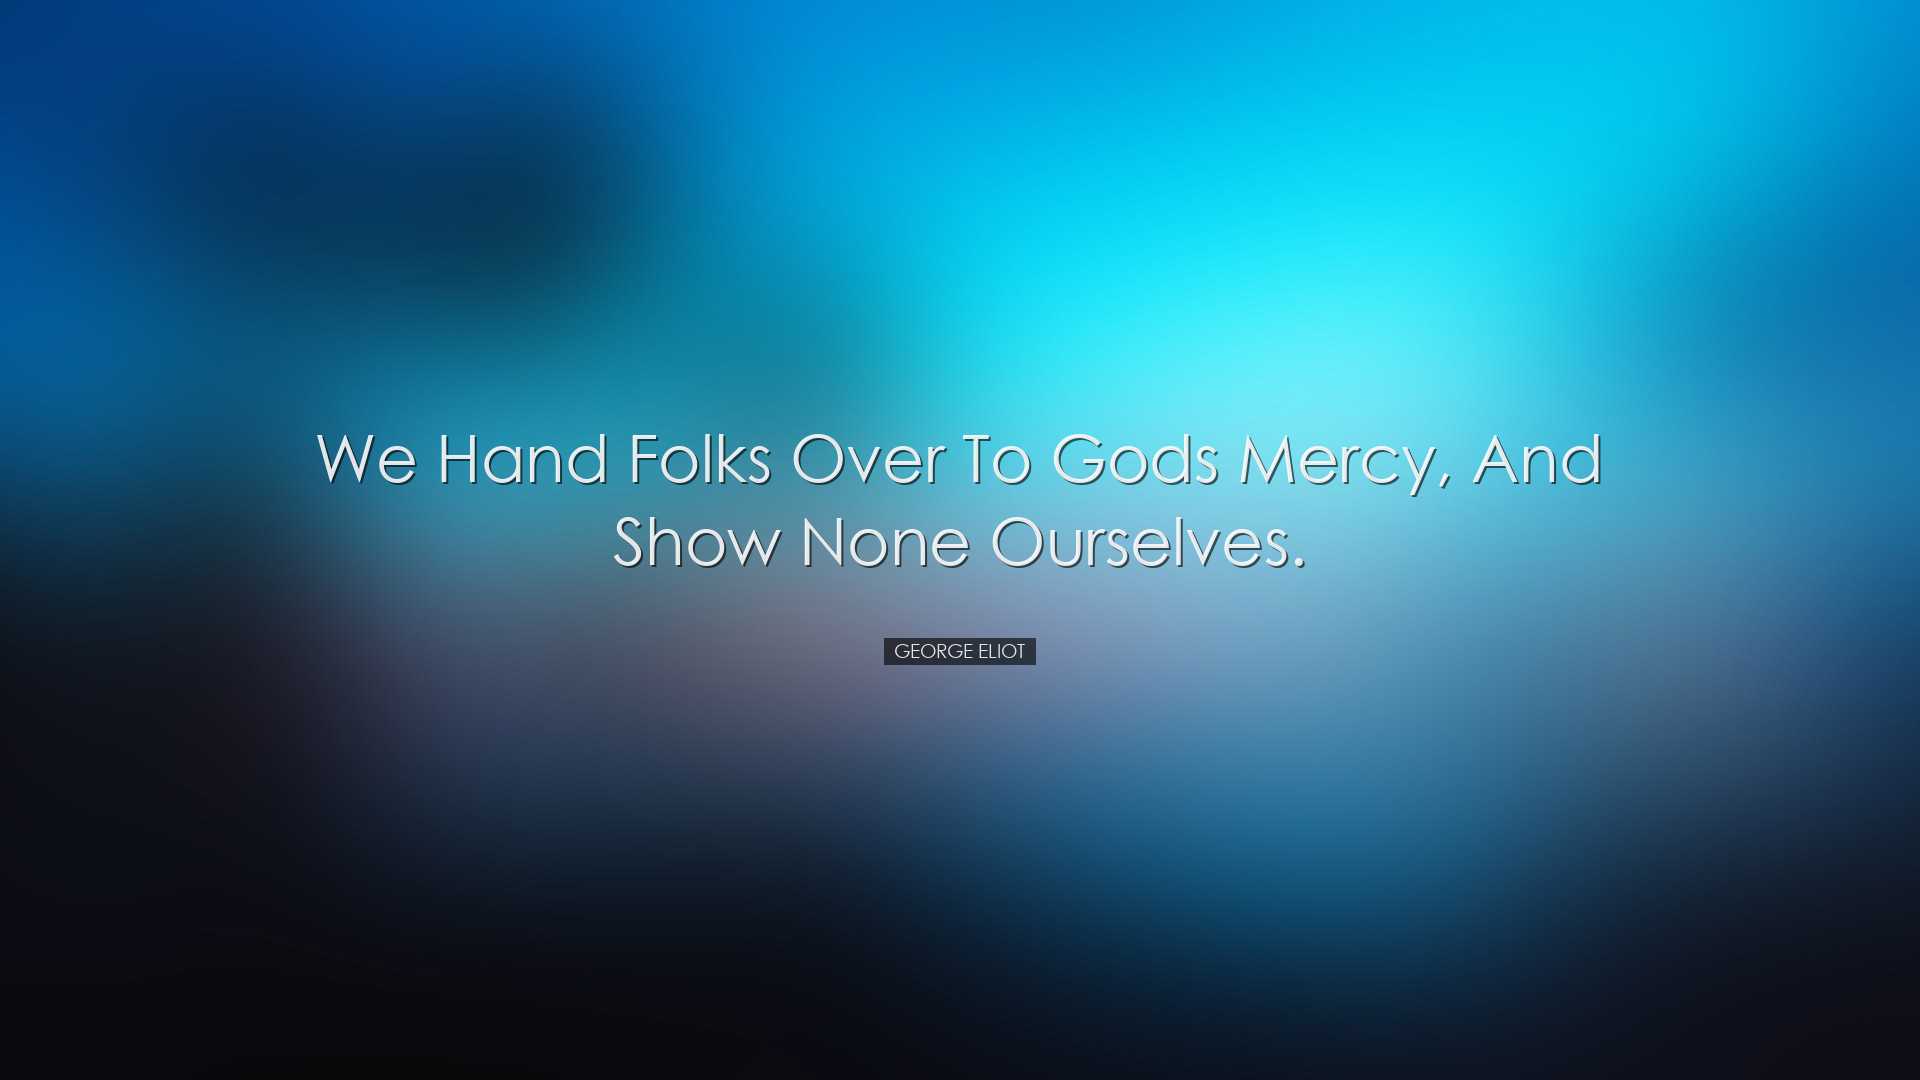 We hand folks over to Gods mercy, and show none ourselves. - Georg